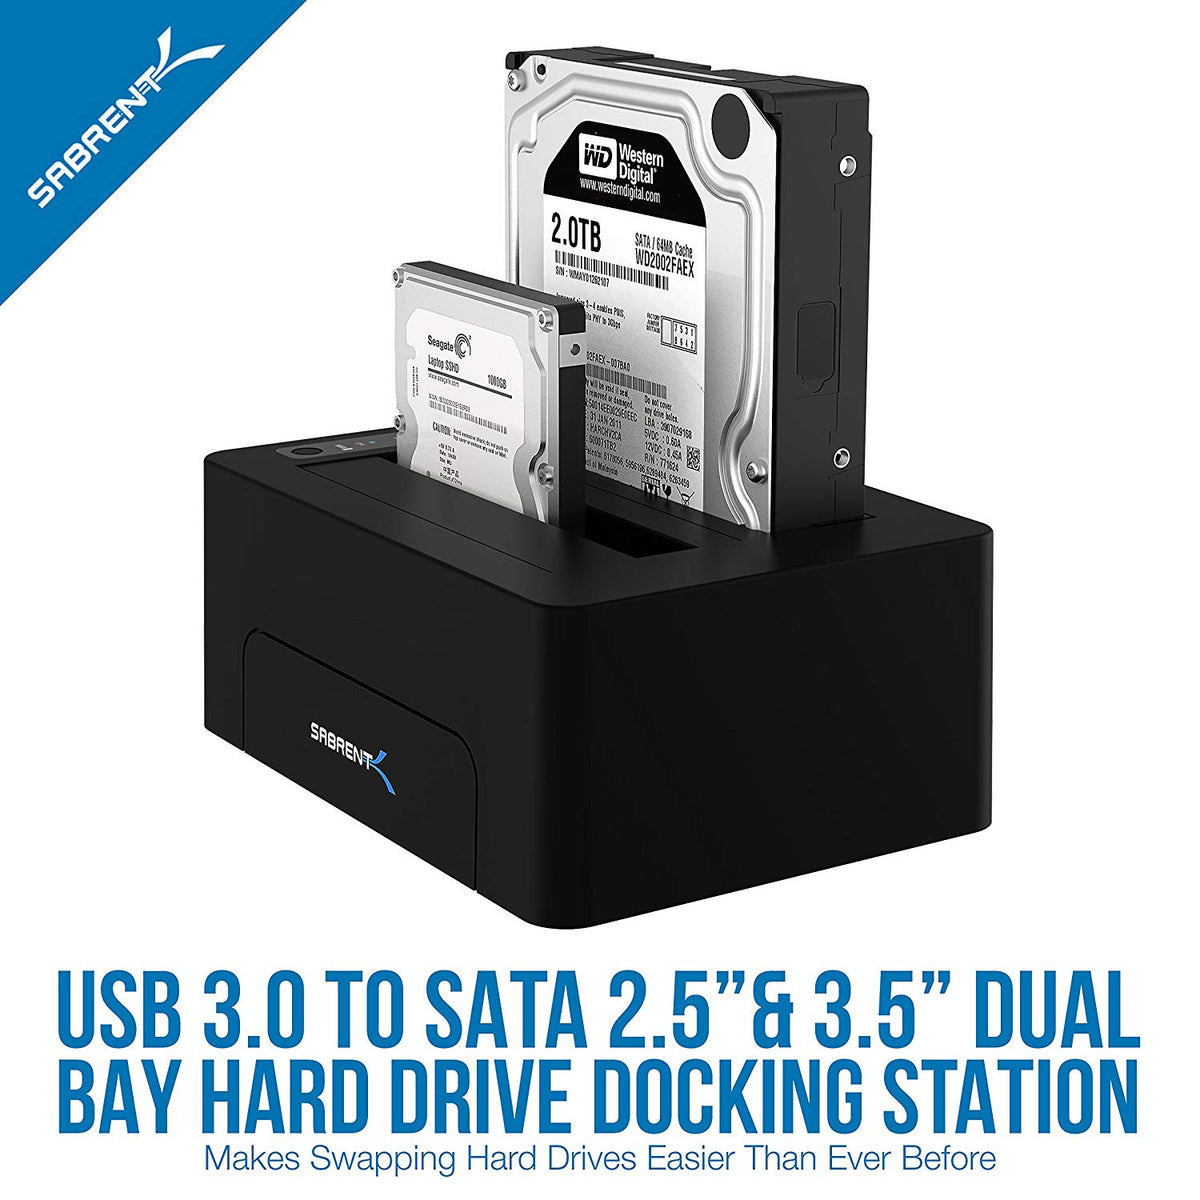 USB 3.0 to SATA Dual Bay Hard Drive Docking Station for 2.5&quot; or 3.5&quot; HDD, SSD